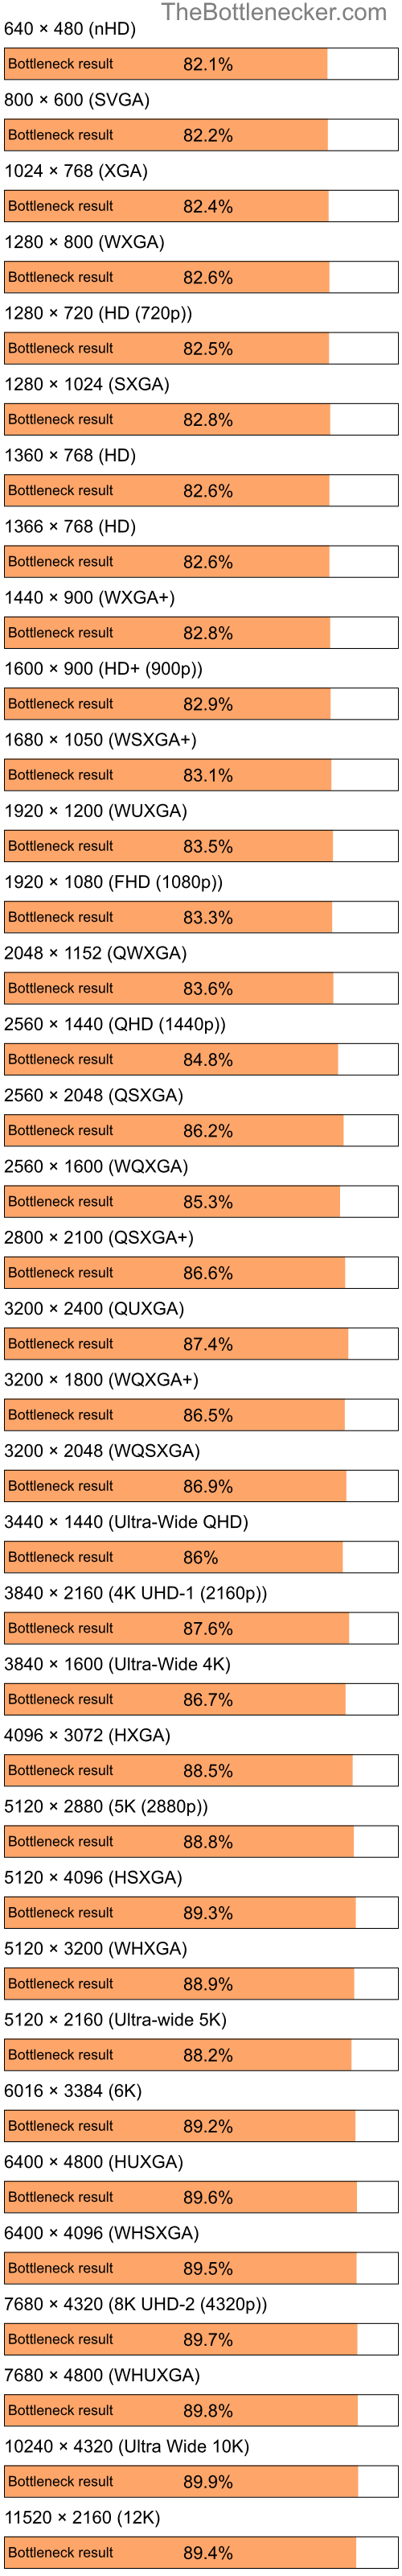 Bottleneck results by resolution for Intel Pentium 4 and NVIDIA GeForce 7025 in Graphic Card Intense Tasks